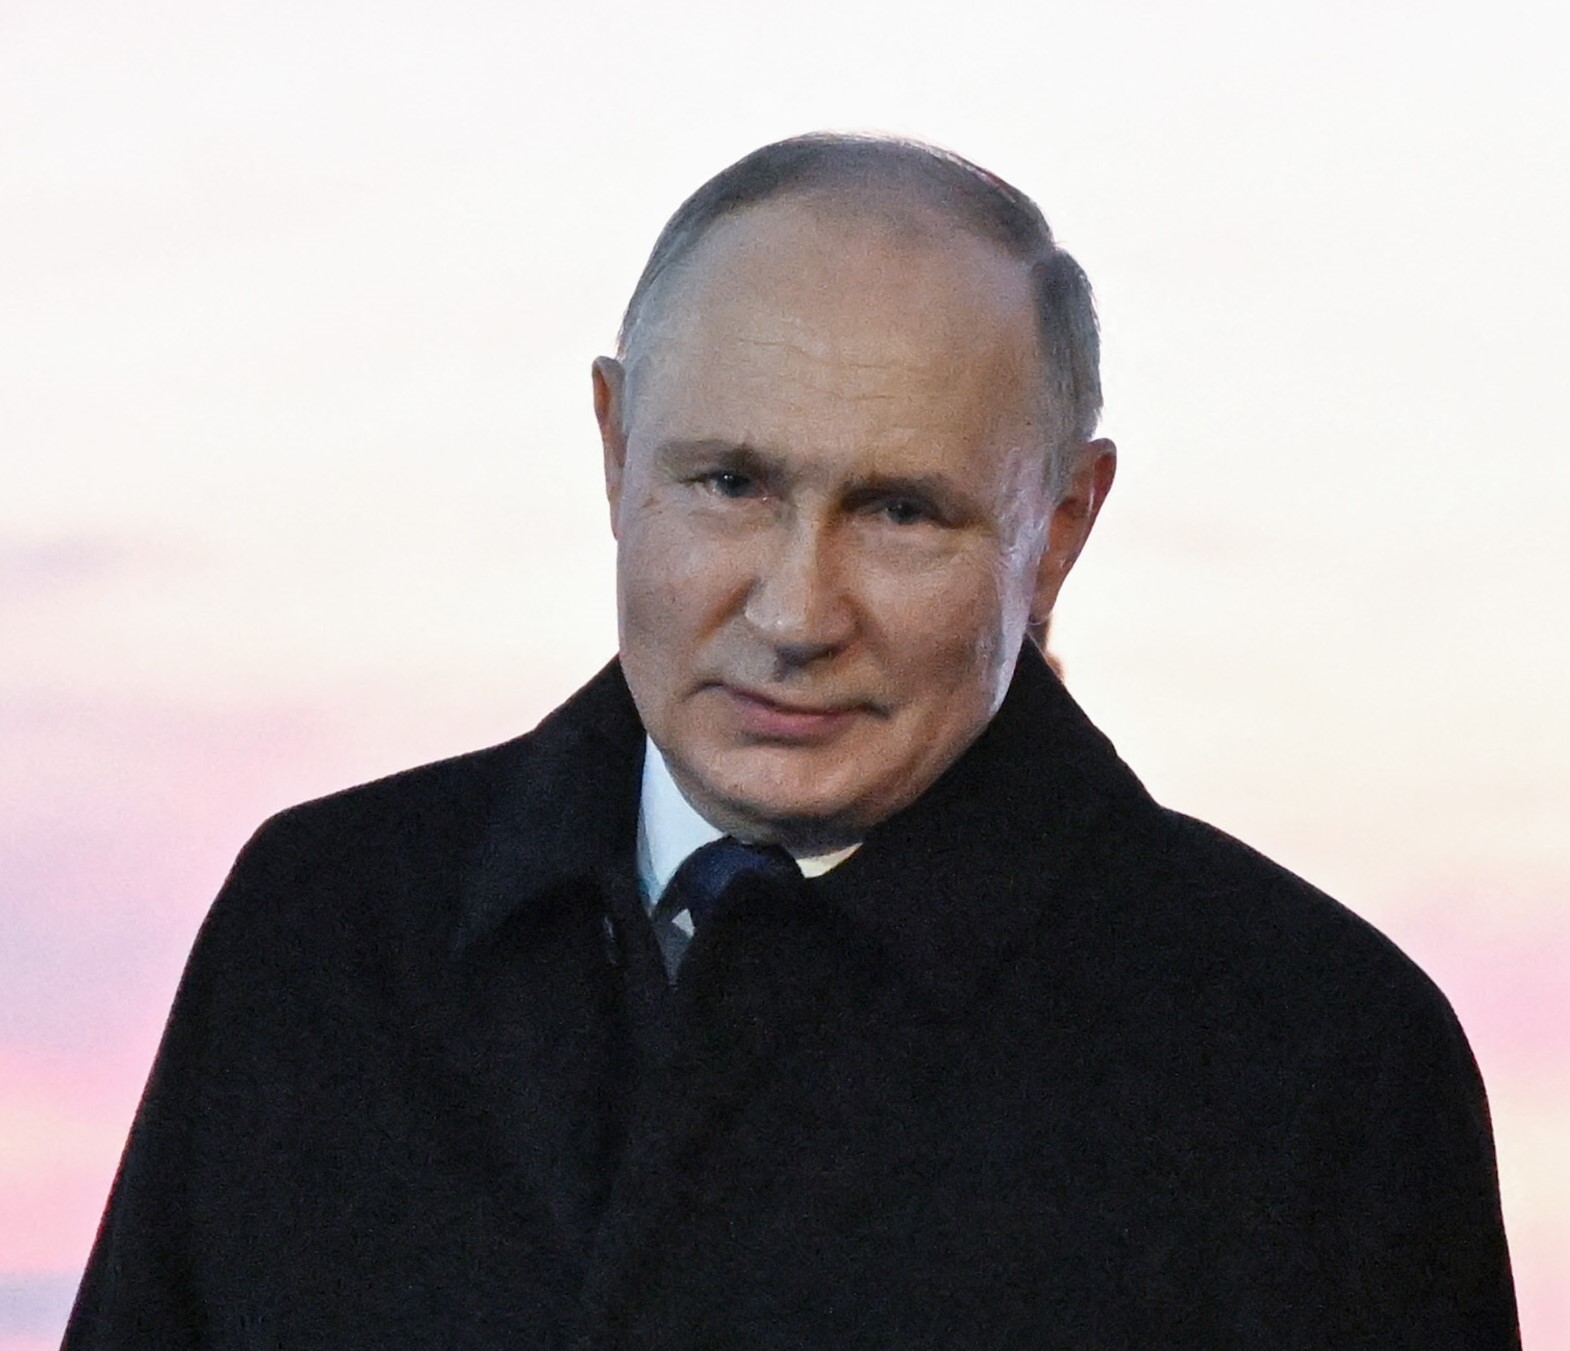 Putin’s Face in Viral Video Raises Questions